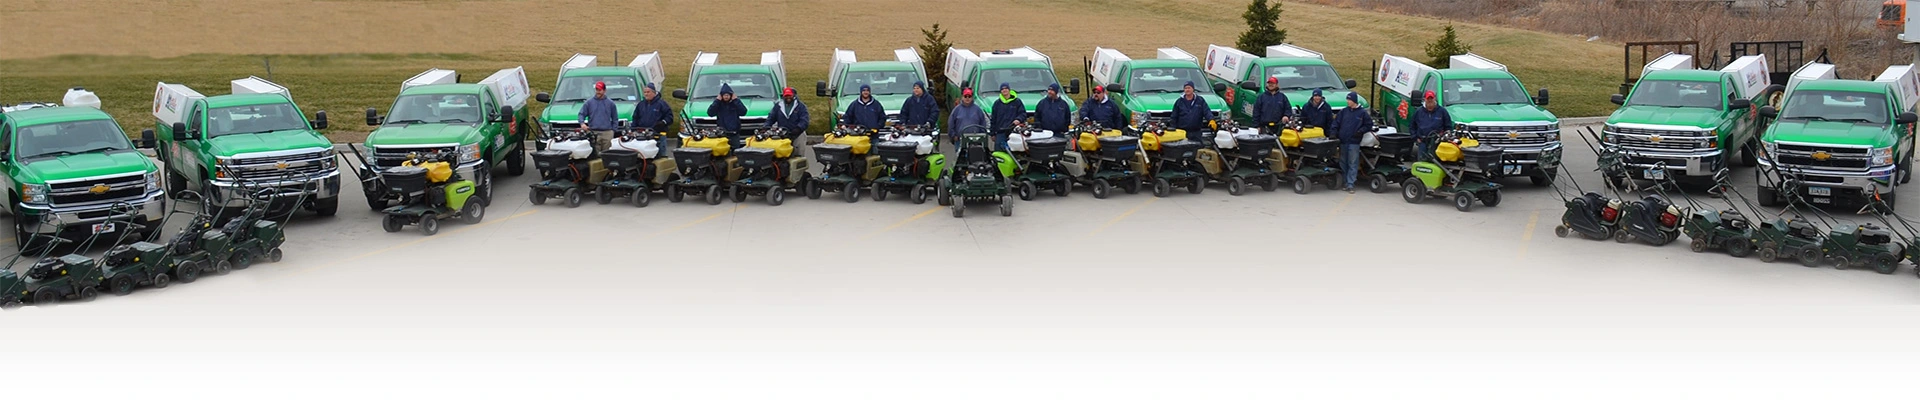 Some of our team and lawn care equipment.